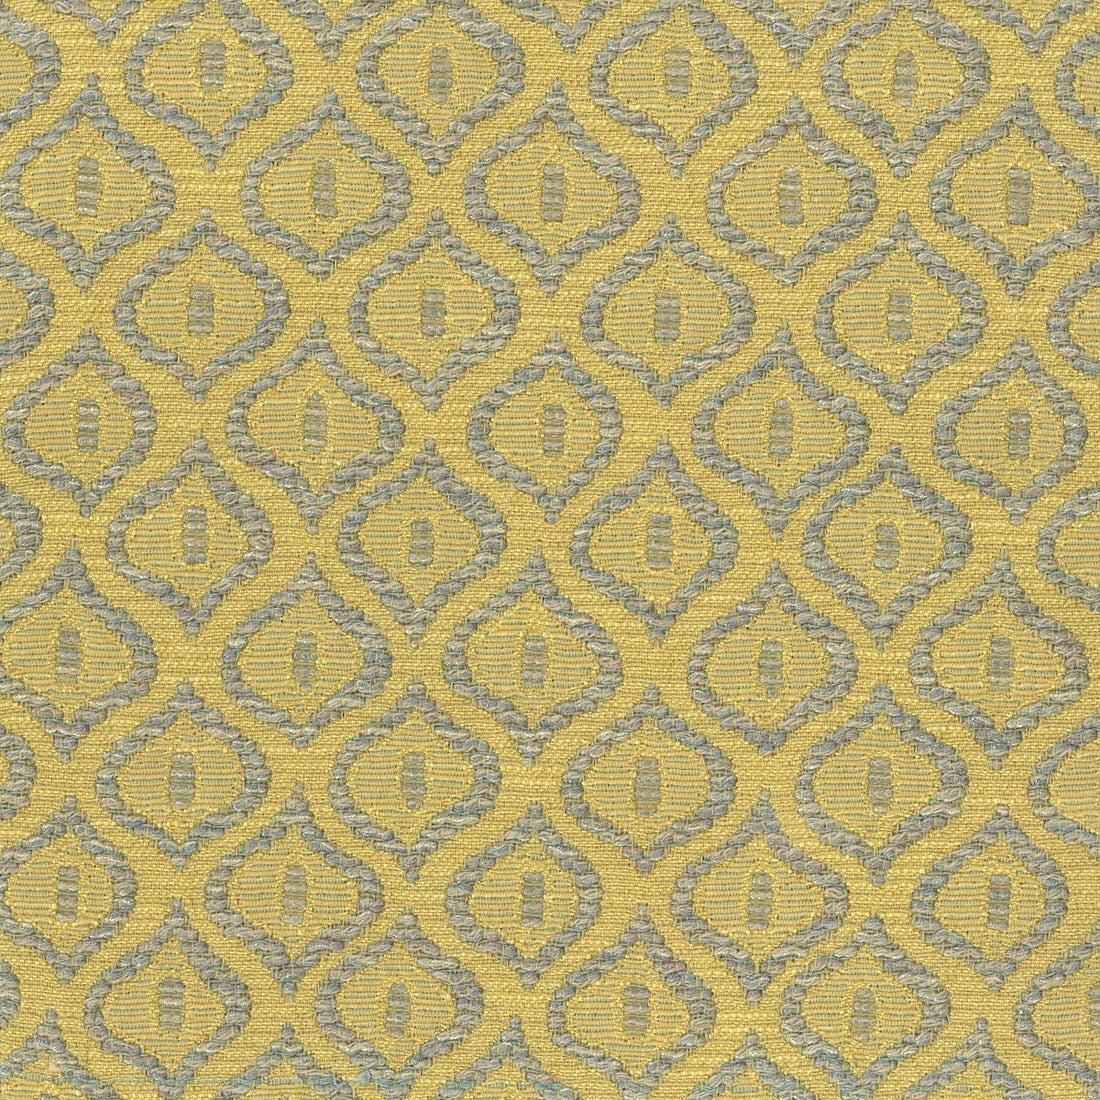 Oman fabric in mimosa color - pattern number VW 0004F015 - by Scalamandre in the Old World Weavers collection